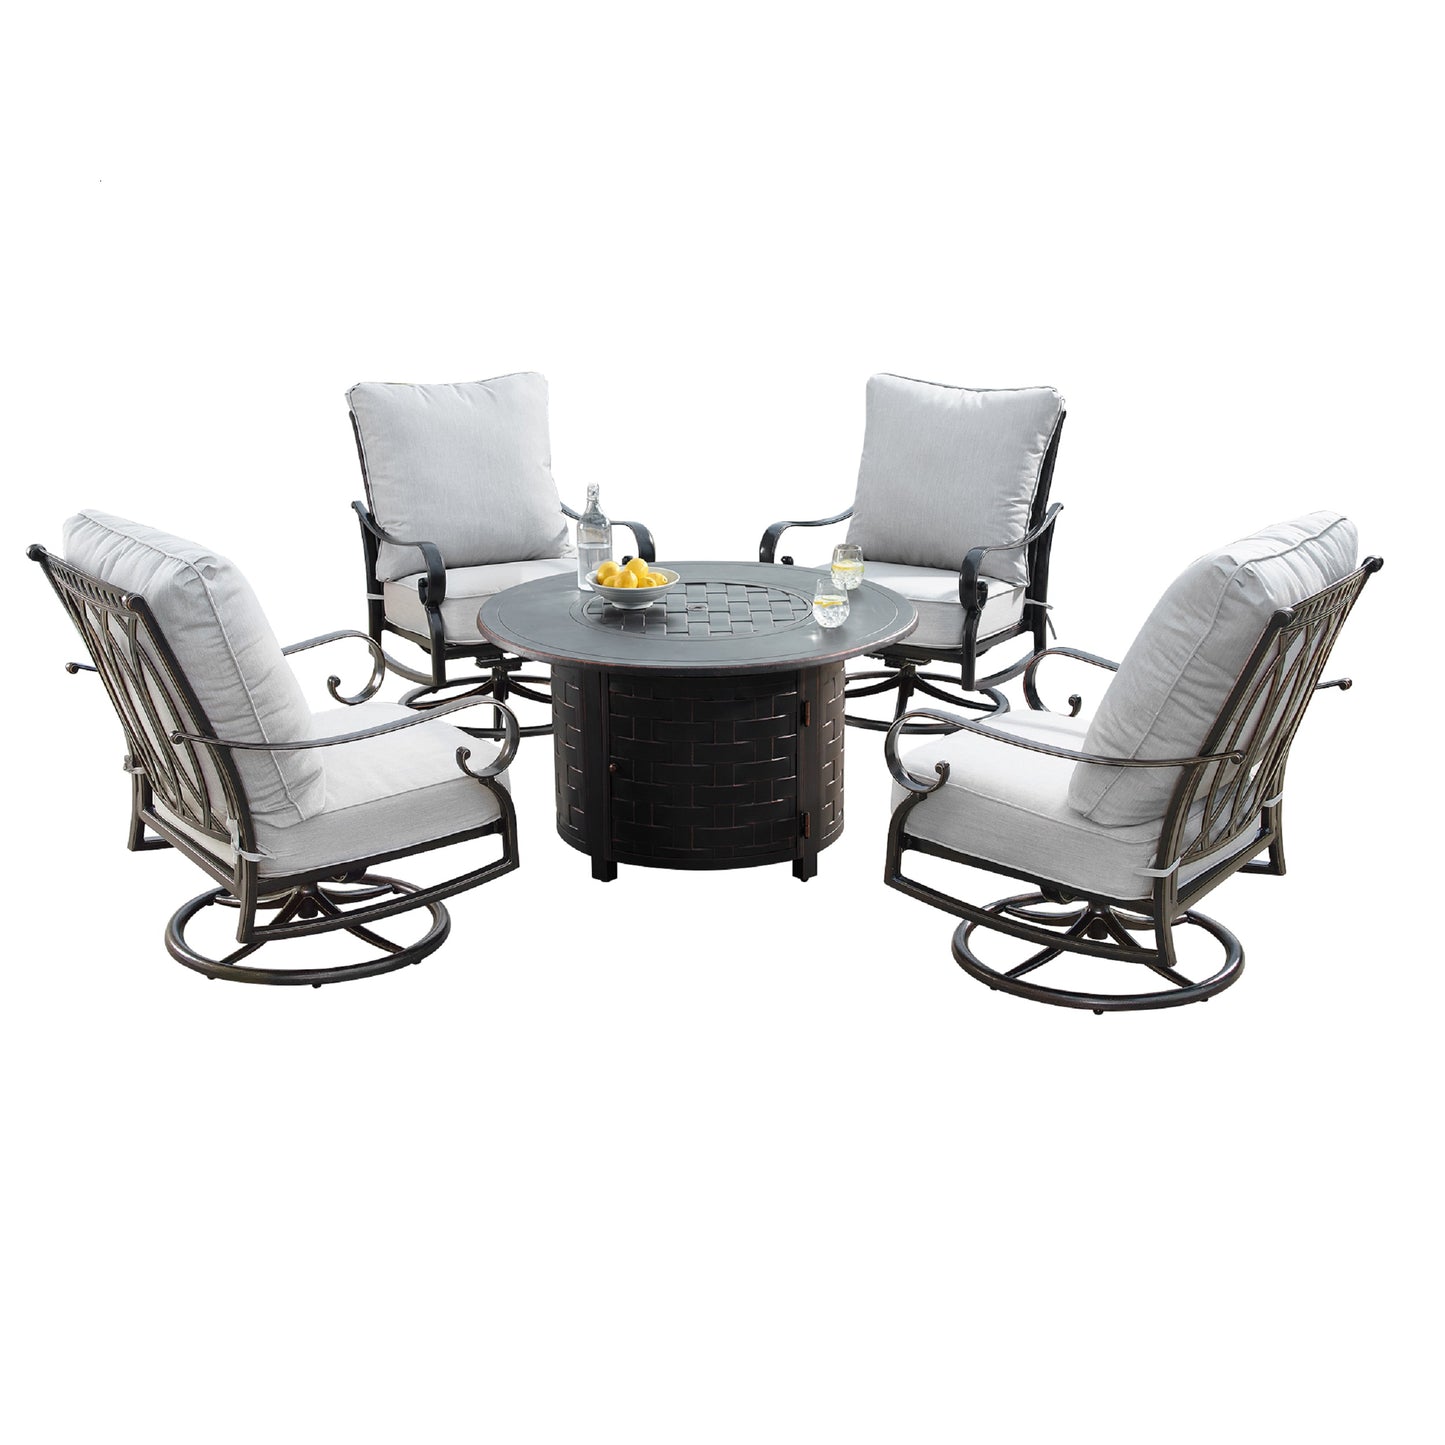 Aluminum 44-in Round Patio Fire Table Set with Swivel Rocking Chairs